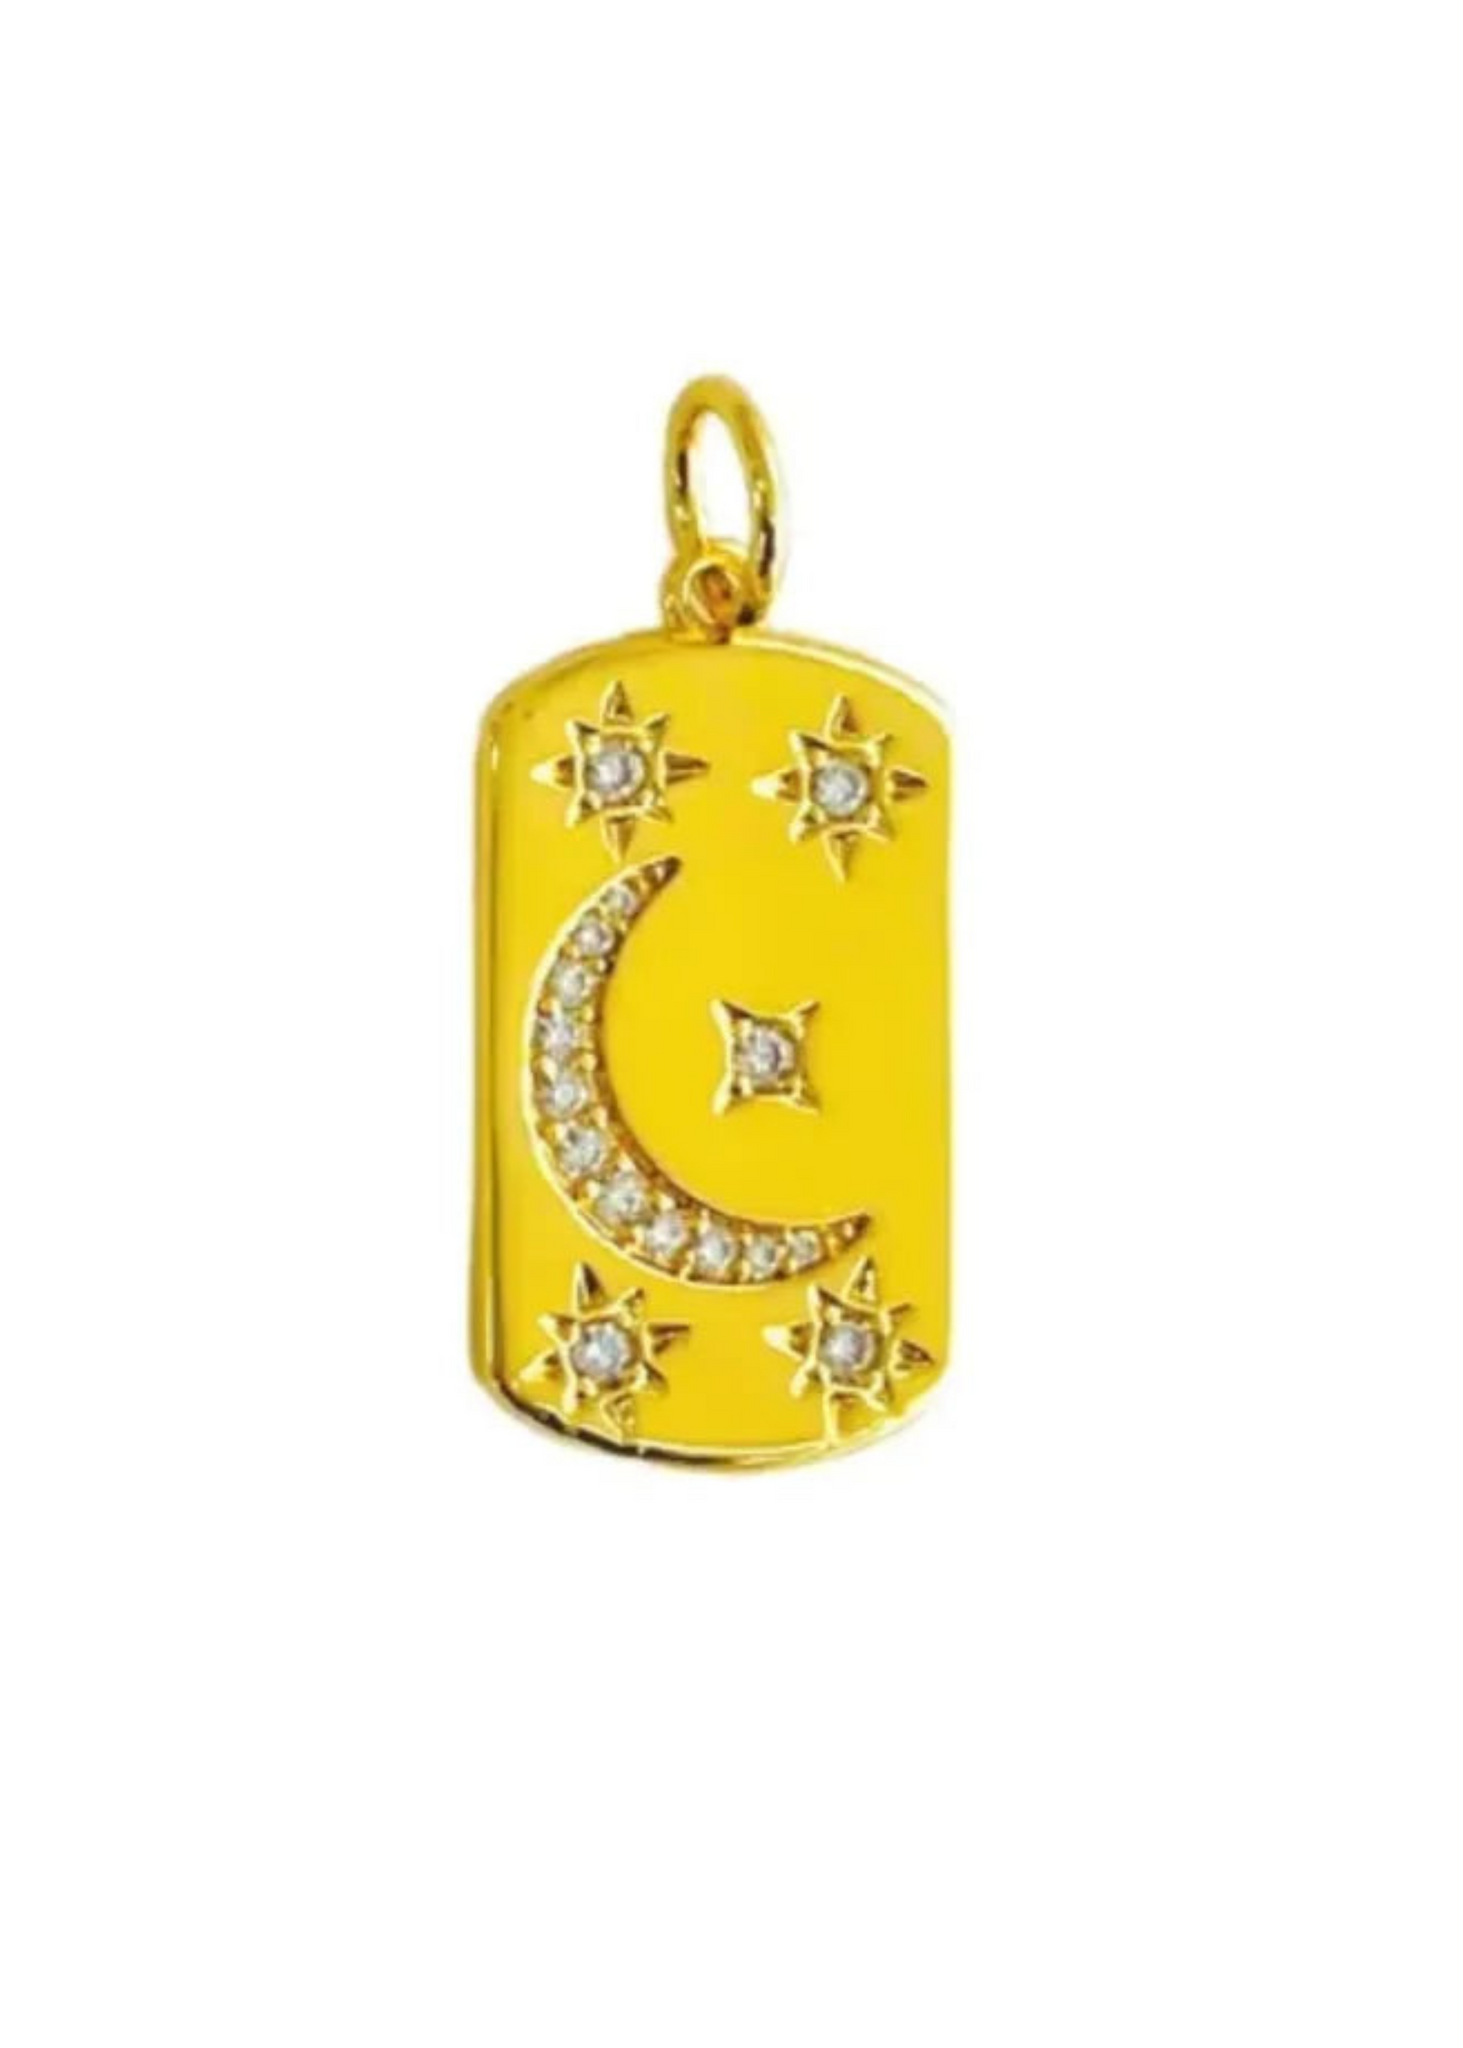 Moon and Stars Charm - Gold